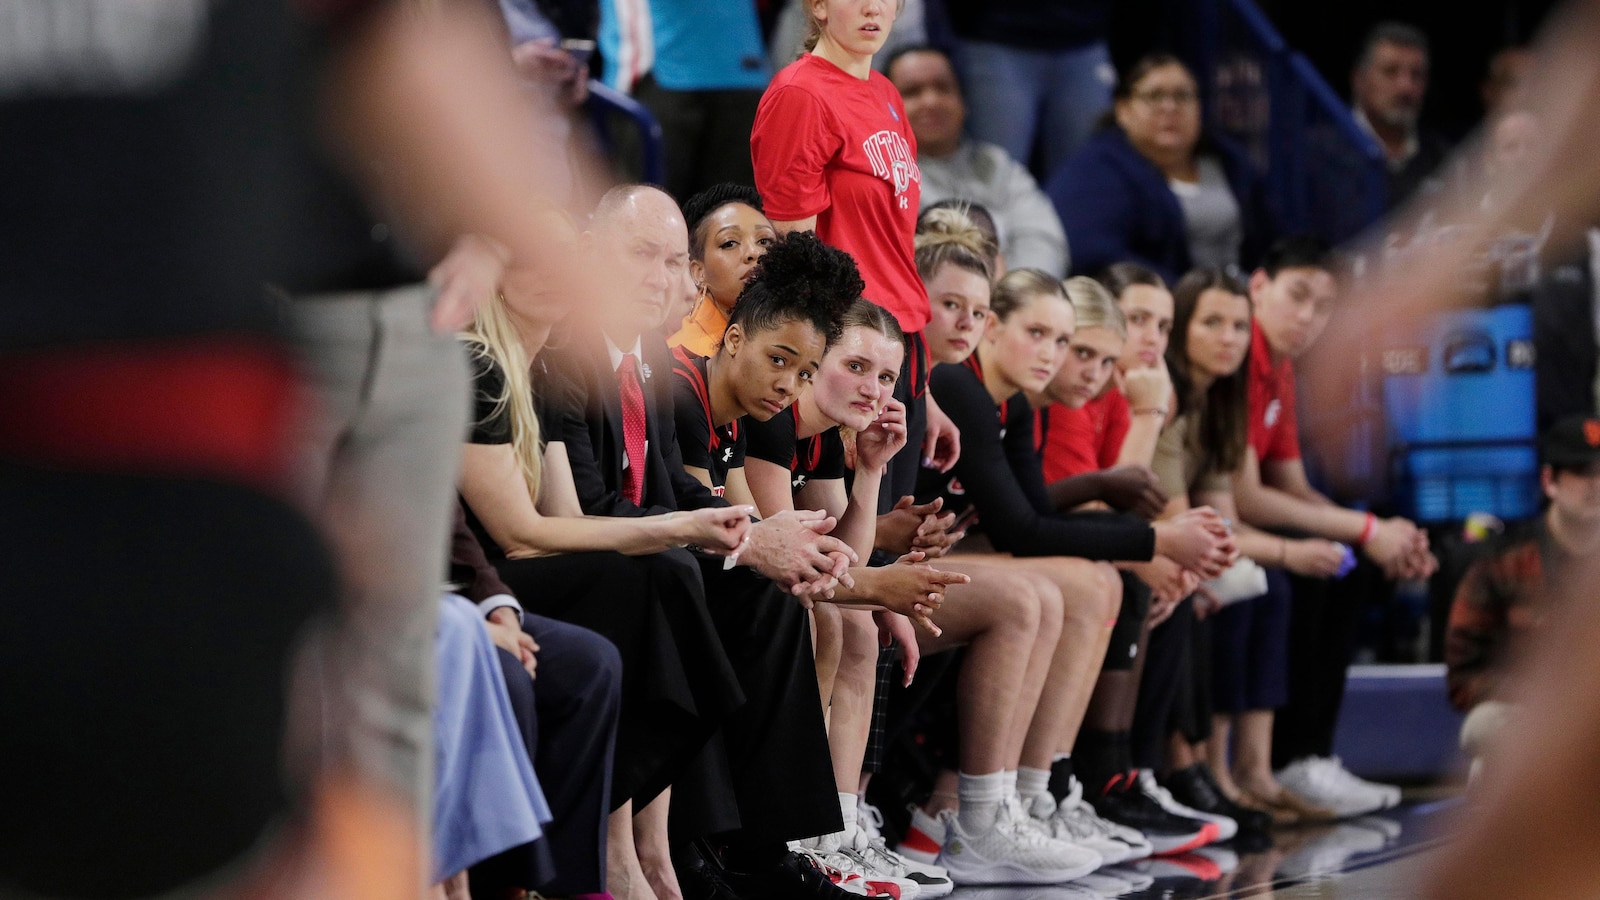 No hate crime charges filed against man who yelled racist slurs at Utah women's basketball team